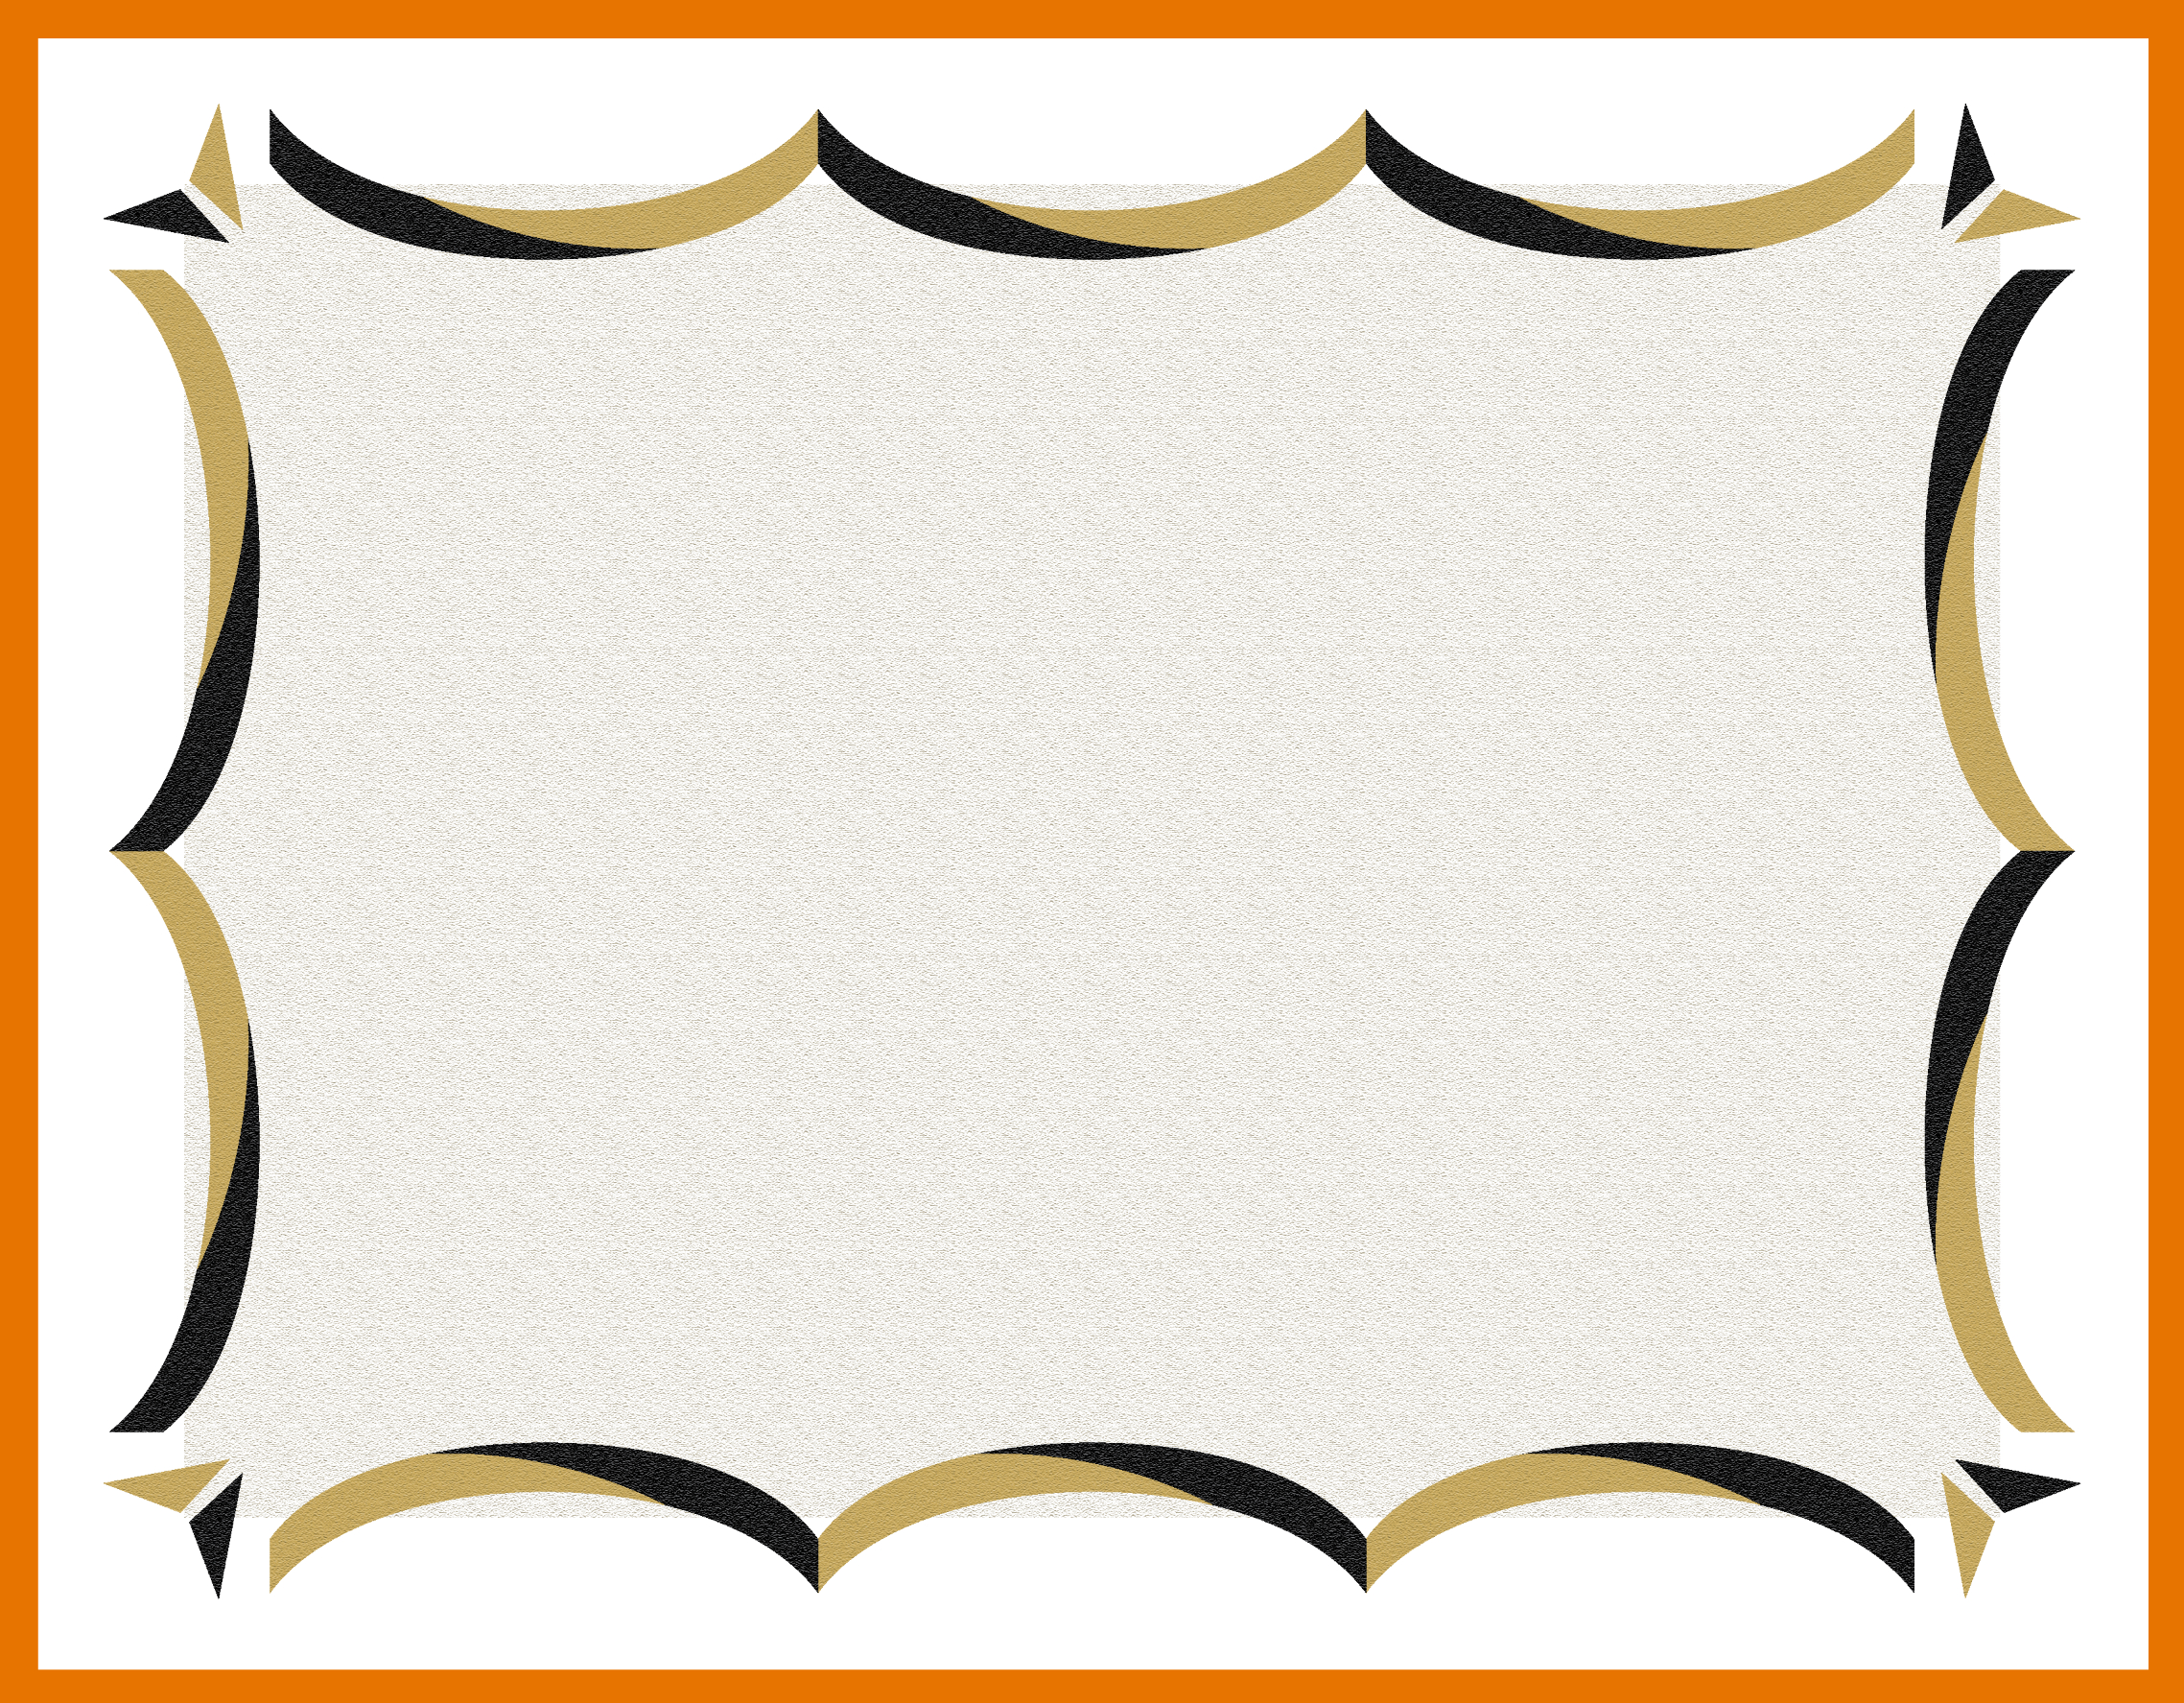 Certificate Border Templates Free Clipart Best Inside Award Certificate Border Template